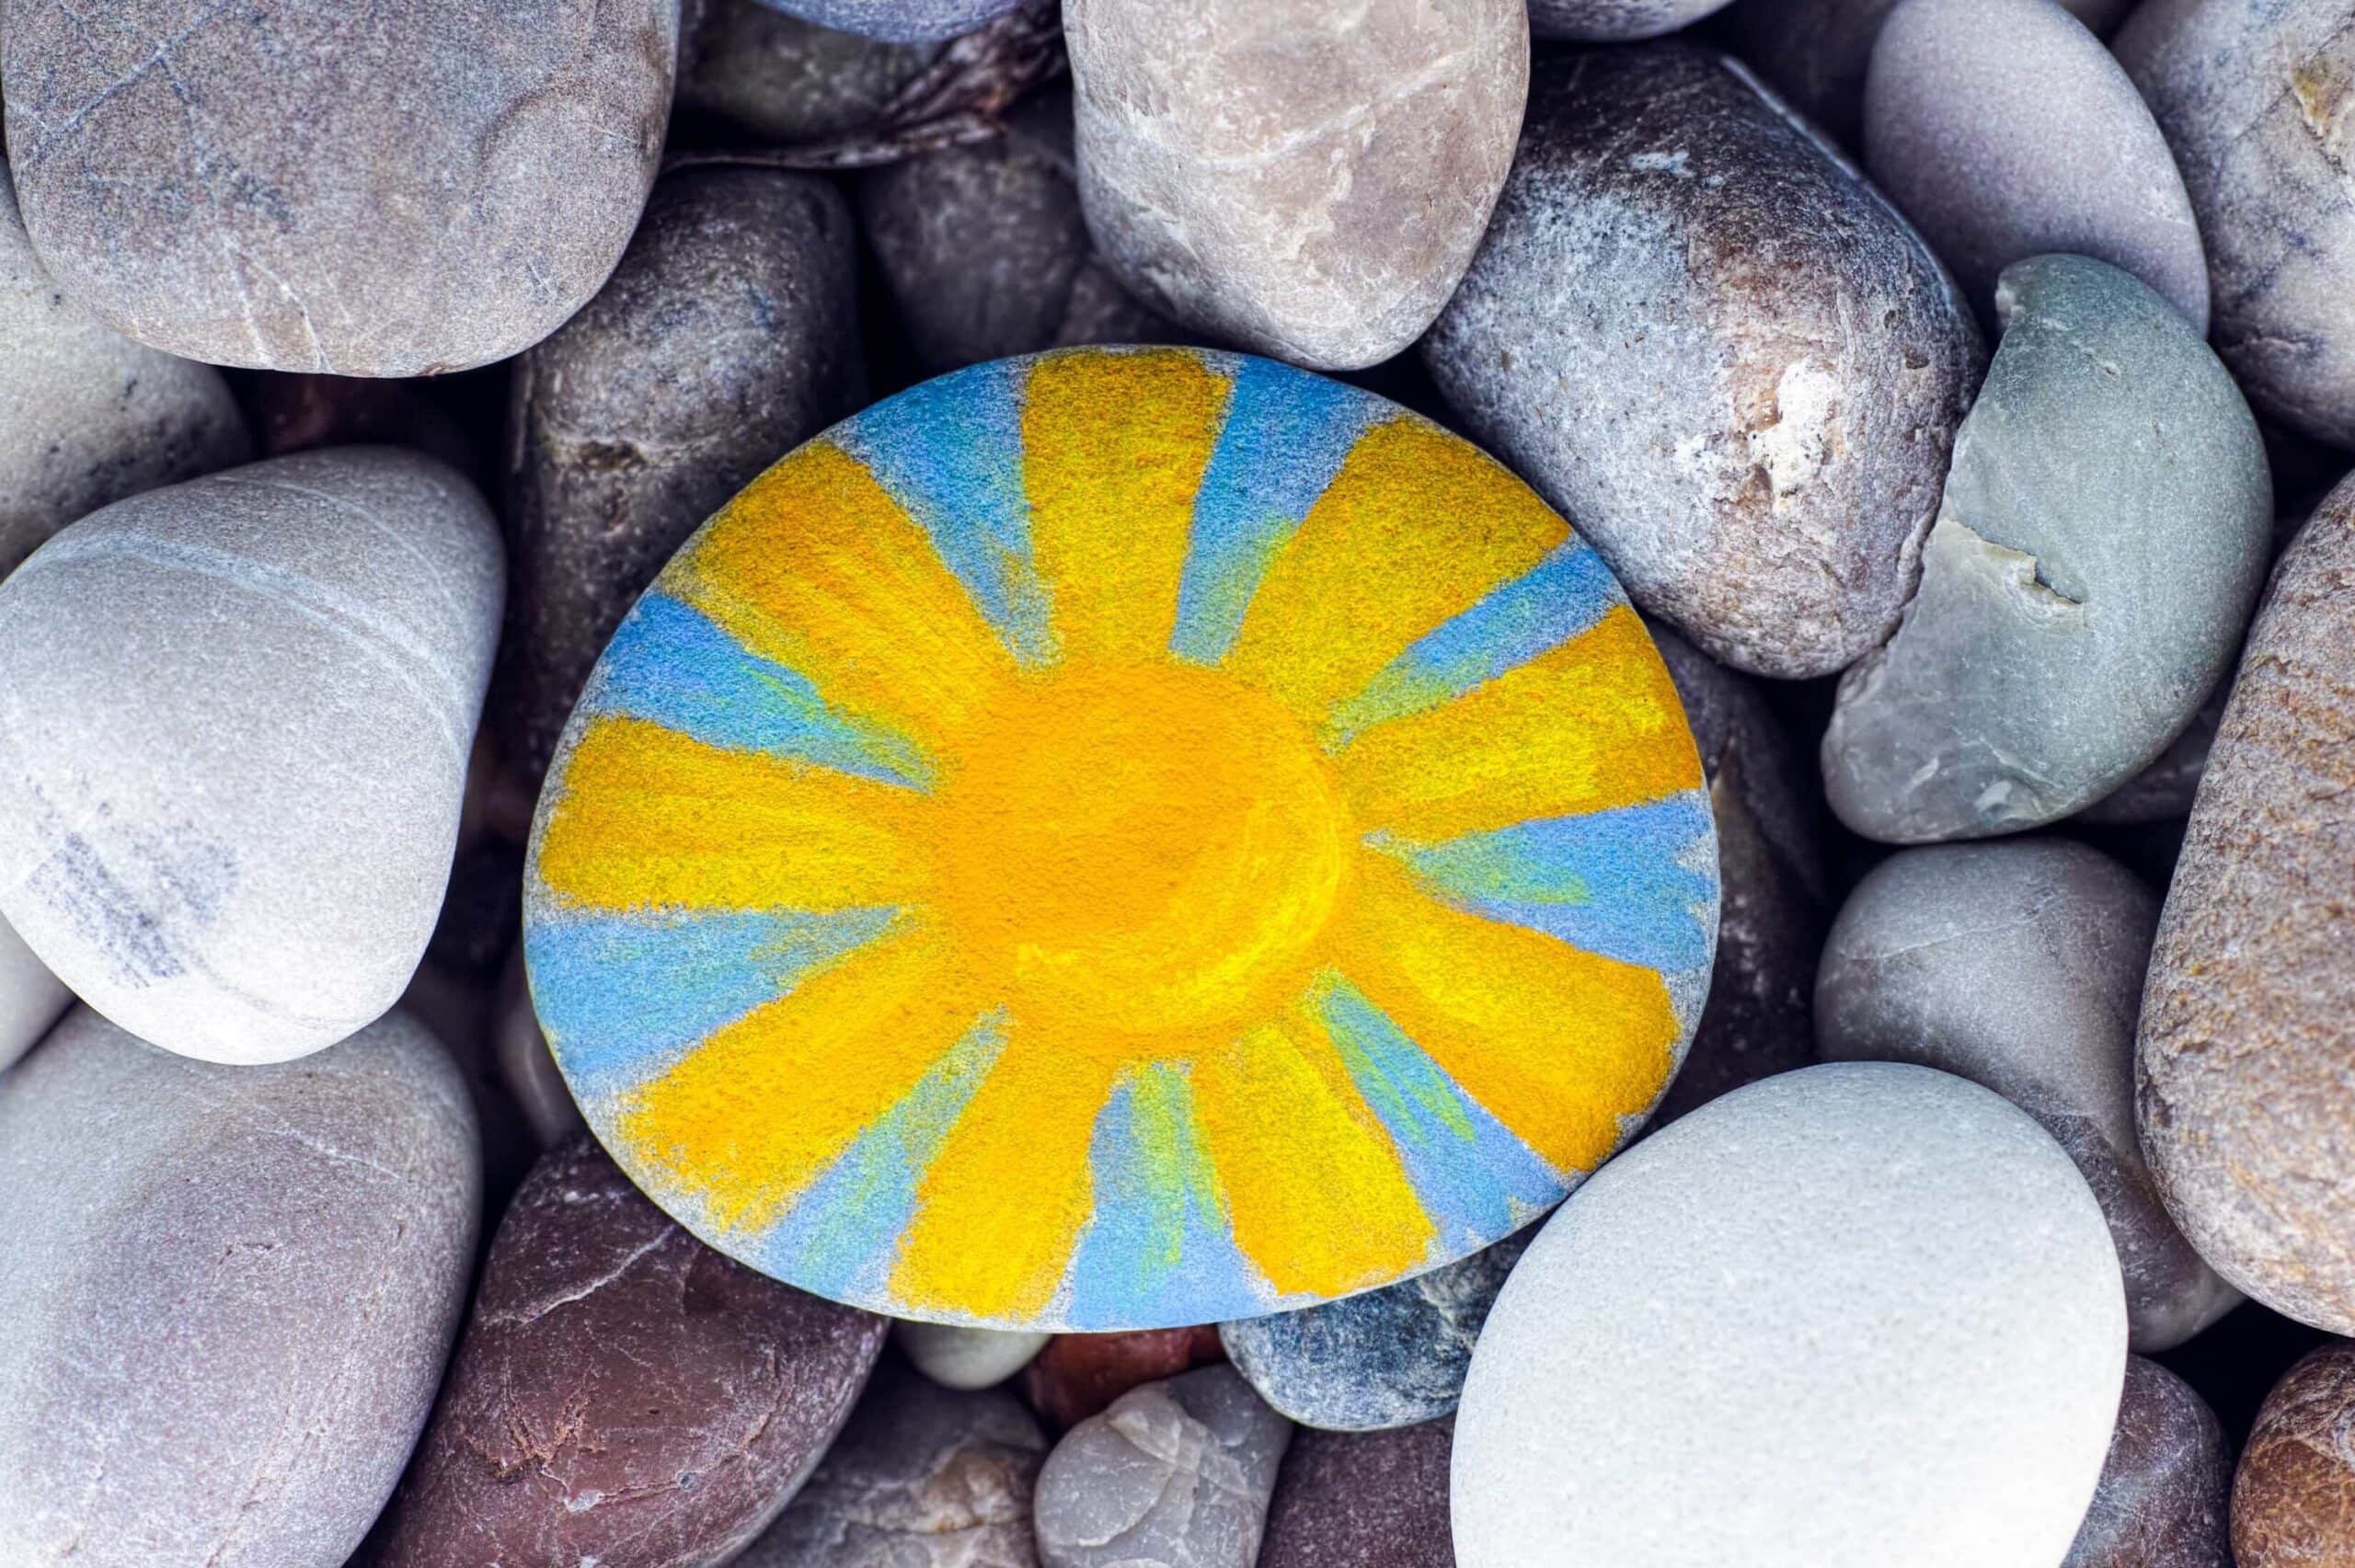 Oval rock painted blue with a yellow sunshine, sitting among unpainted rocks.